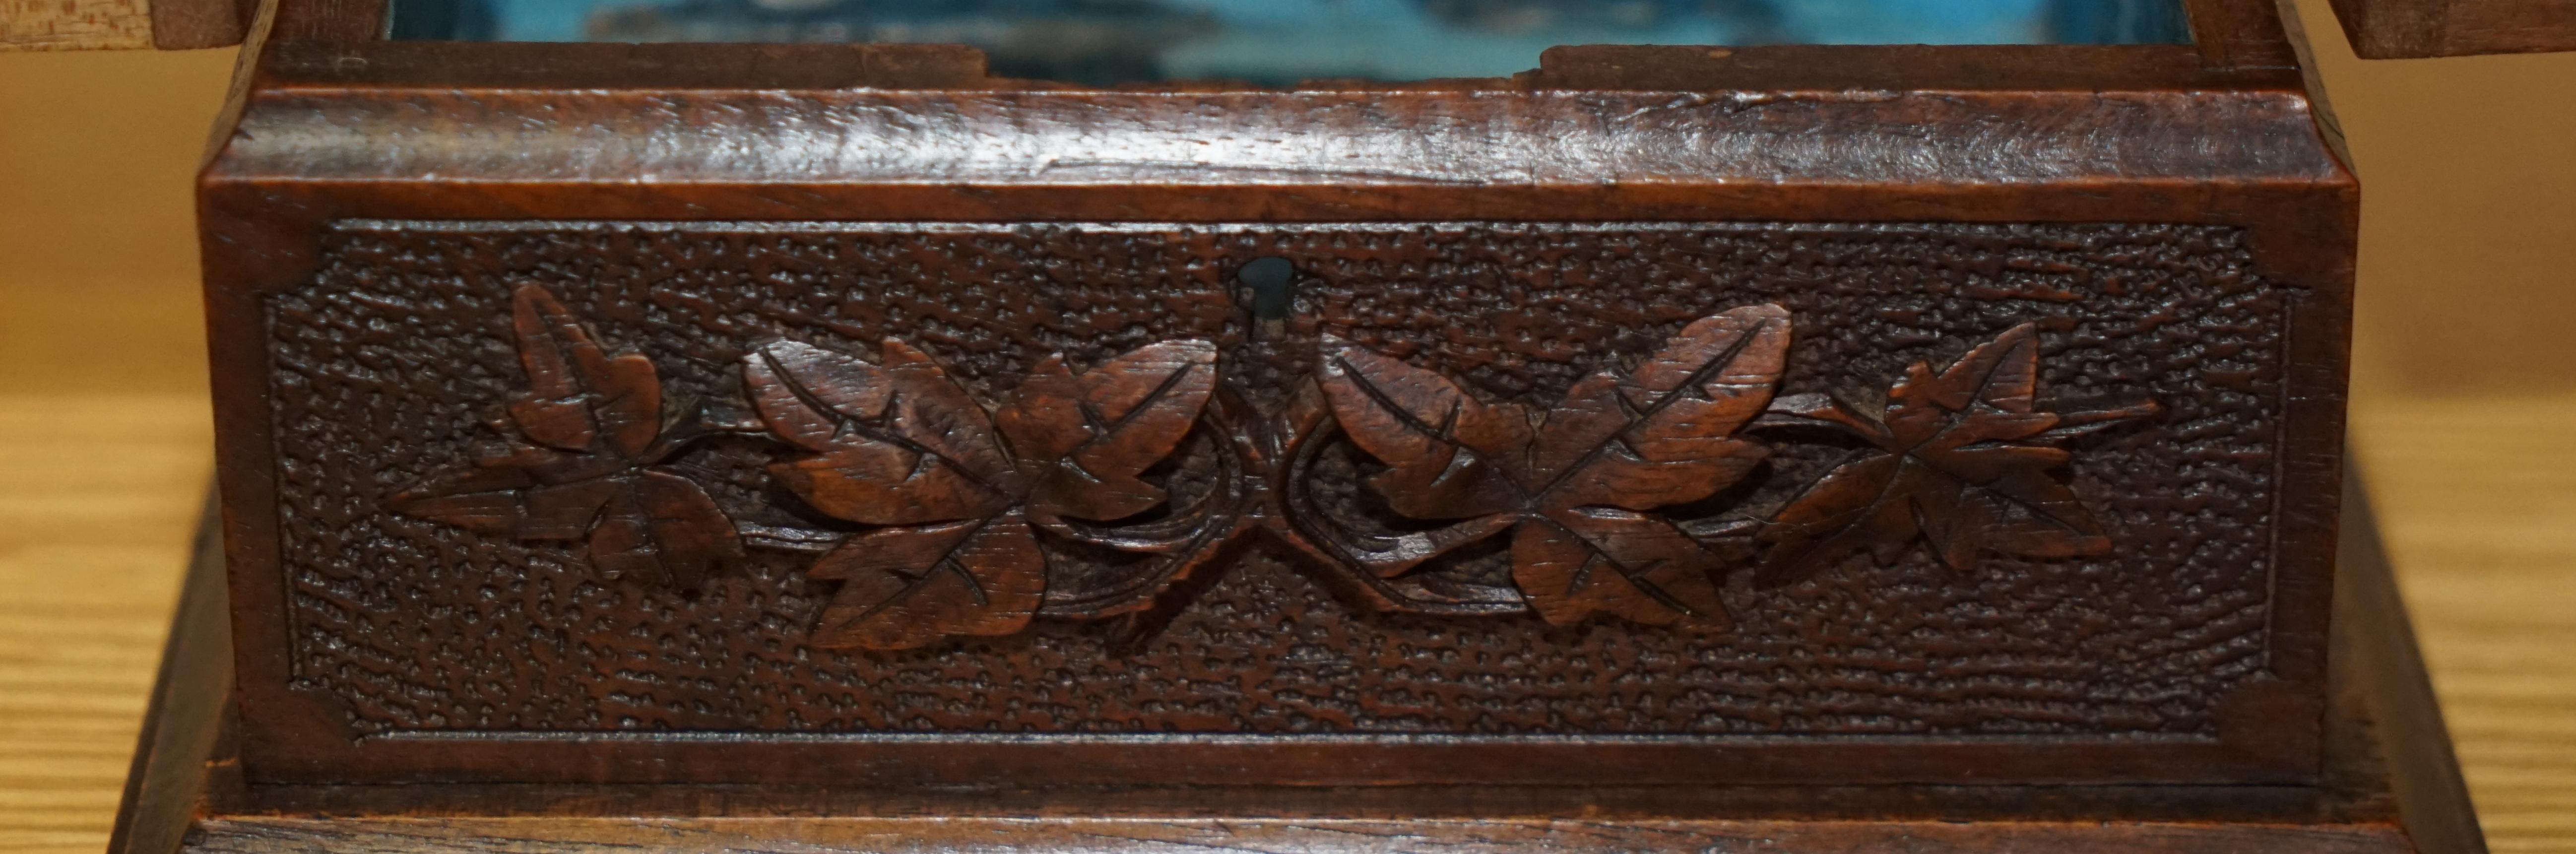 Stunning Original Antique Hand Carved Black Forest Wood Jewellery Box For Sale 12